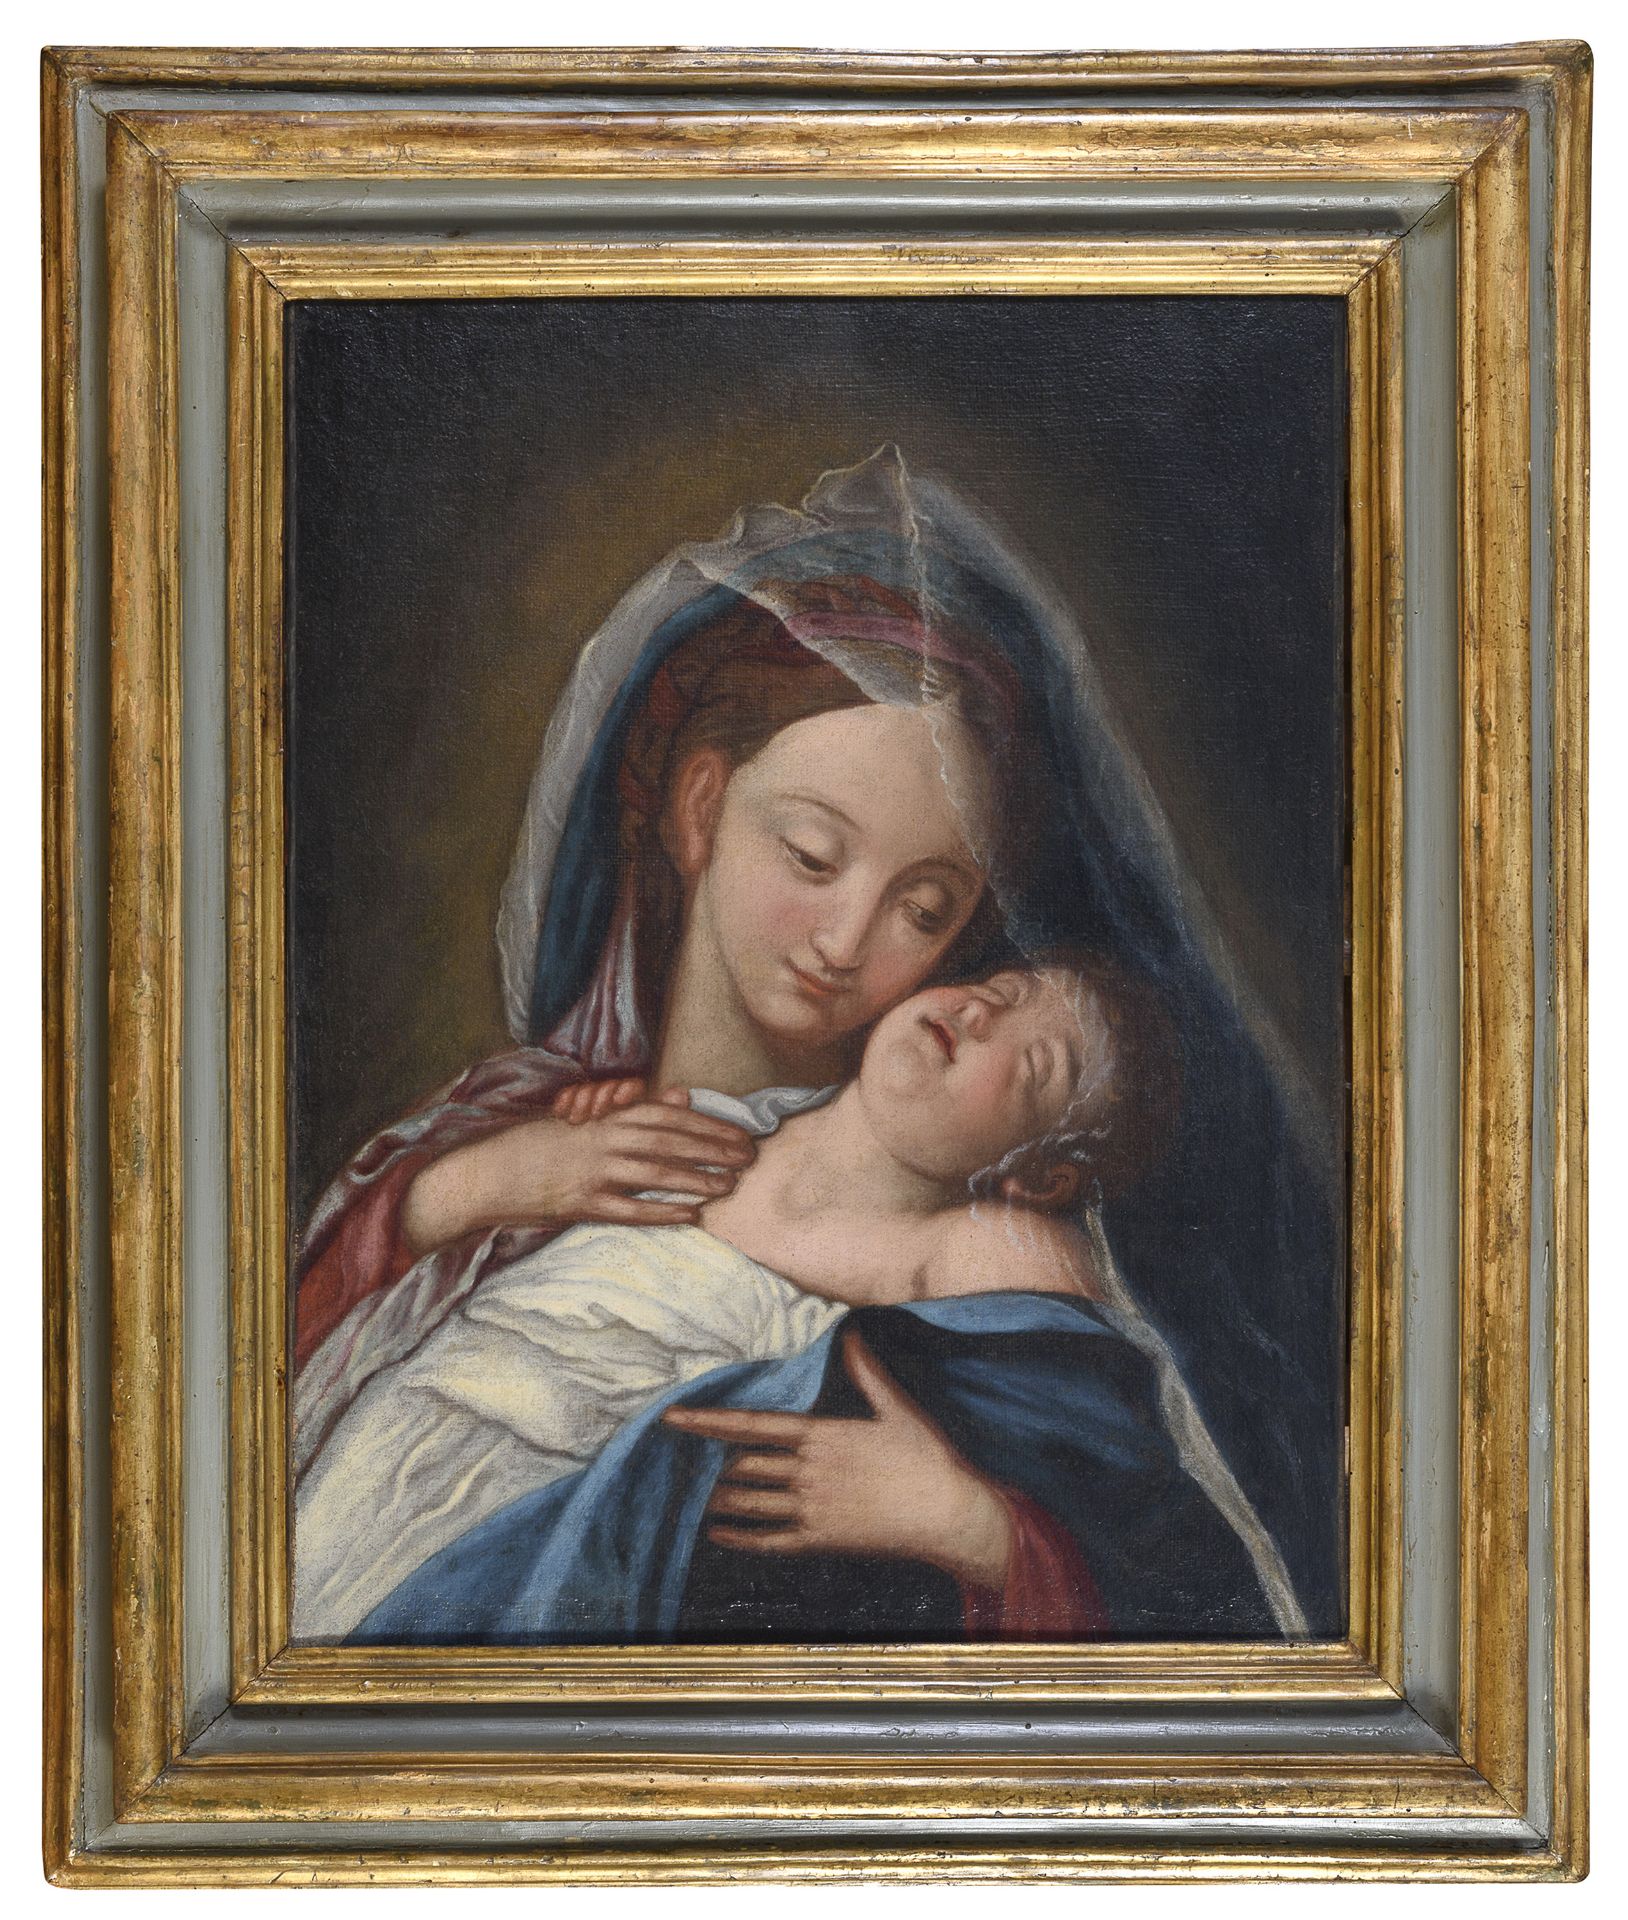 ITALIAN OIL PAINTING OF MADONNA AND CHILD LATE 18TH CENTURY